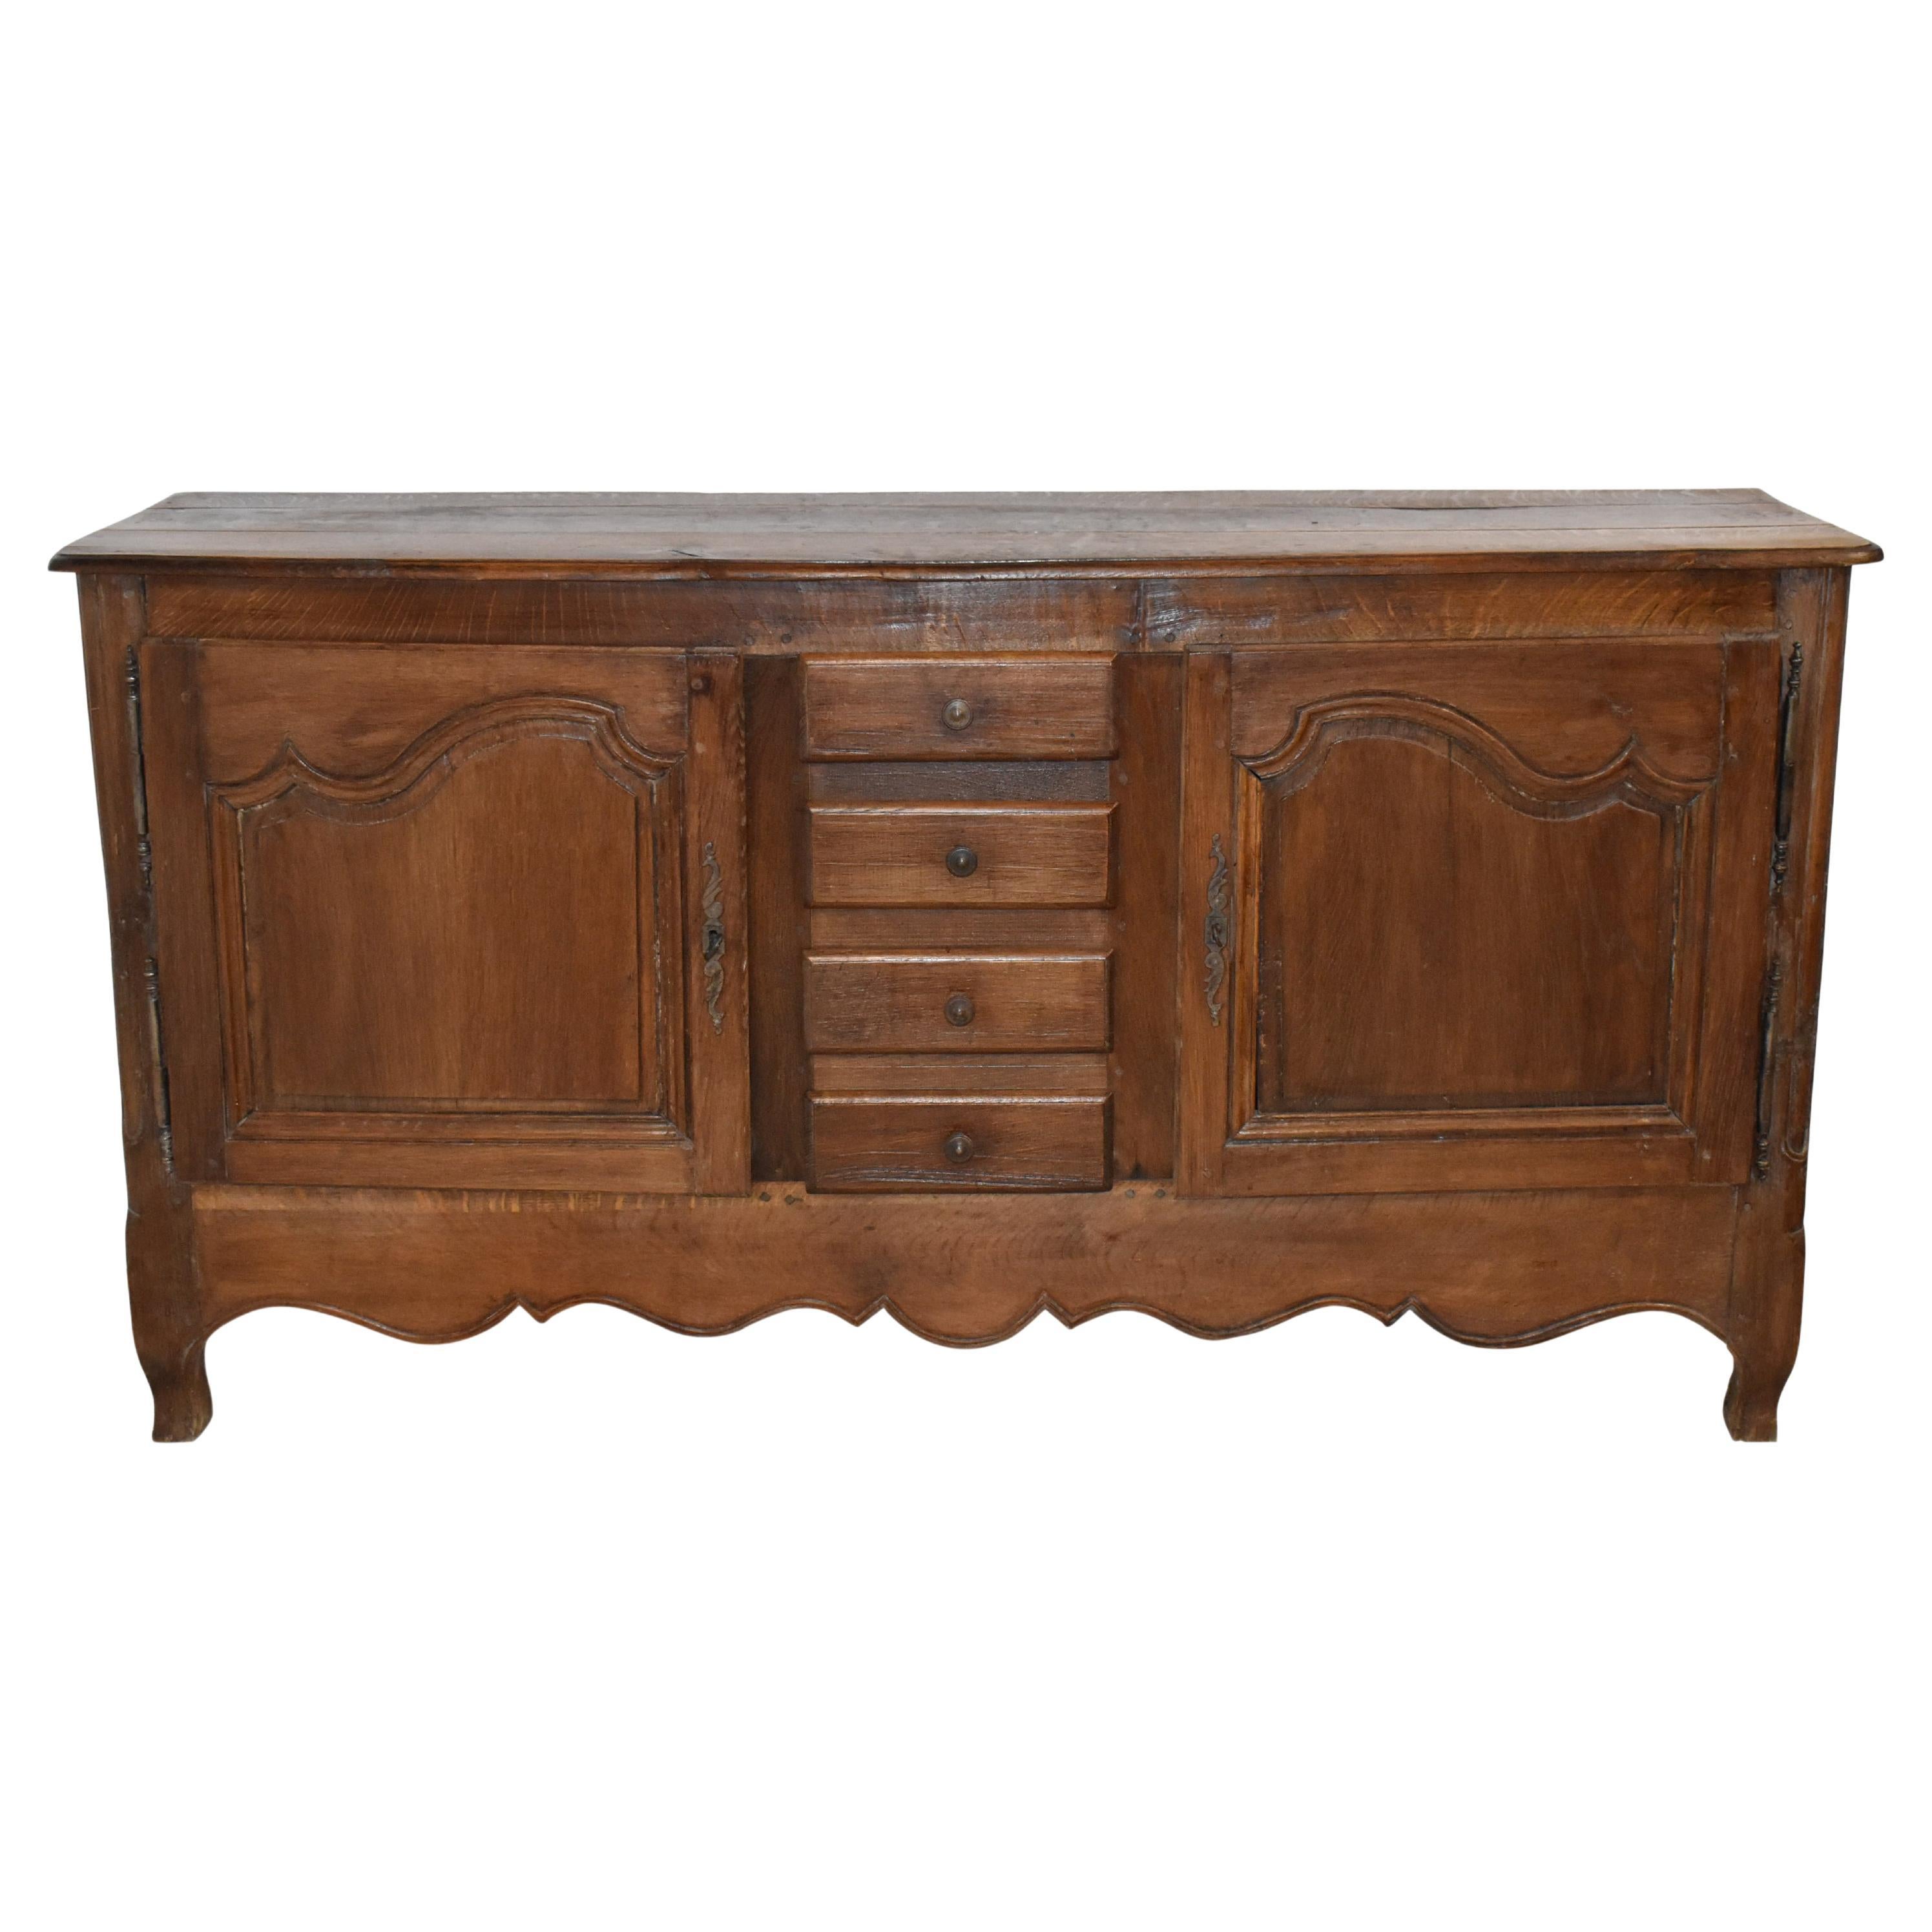 Rustic Oak Sideboard with Two Doors and Four Drawers, circa 1880 For Sale